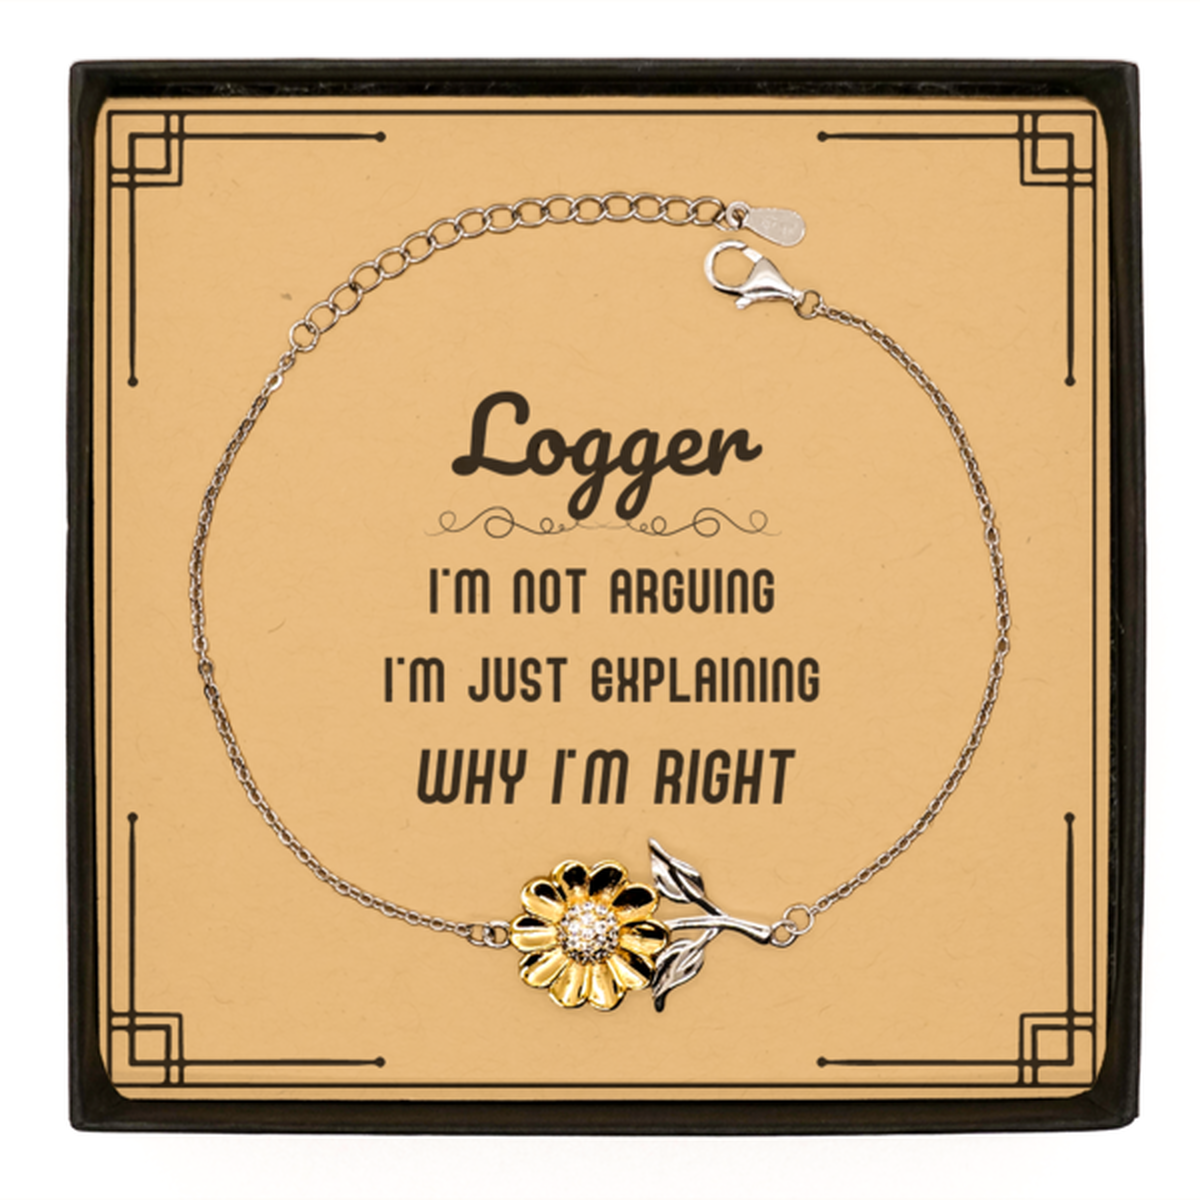 Logger I'm not Arguing. I'm Just Explaining Why I'm RIGHT Sunflower Bracelet, Funny Saying Quote Logger Gifts For Logger Message Card Graduation Birthday Christmas Gifts for Men Women Coworker